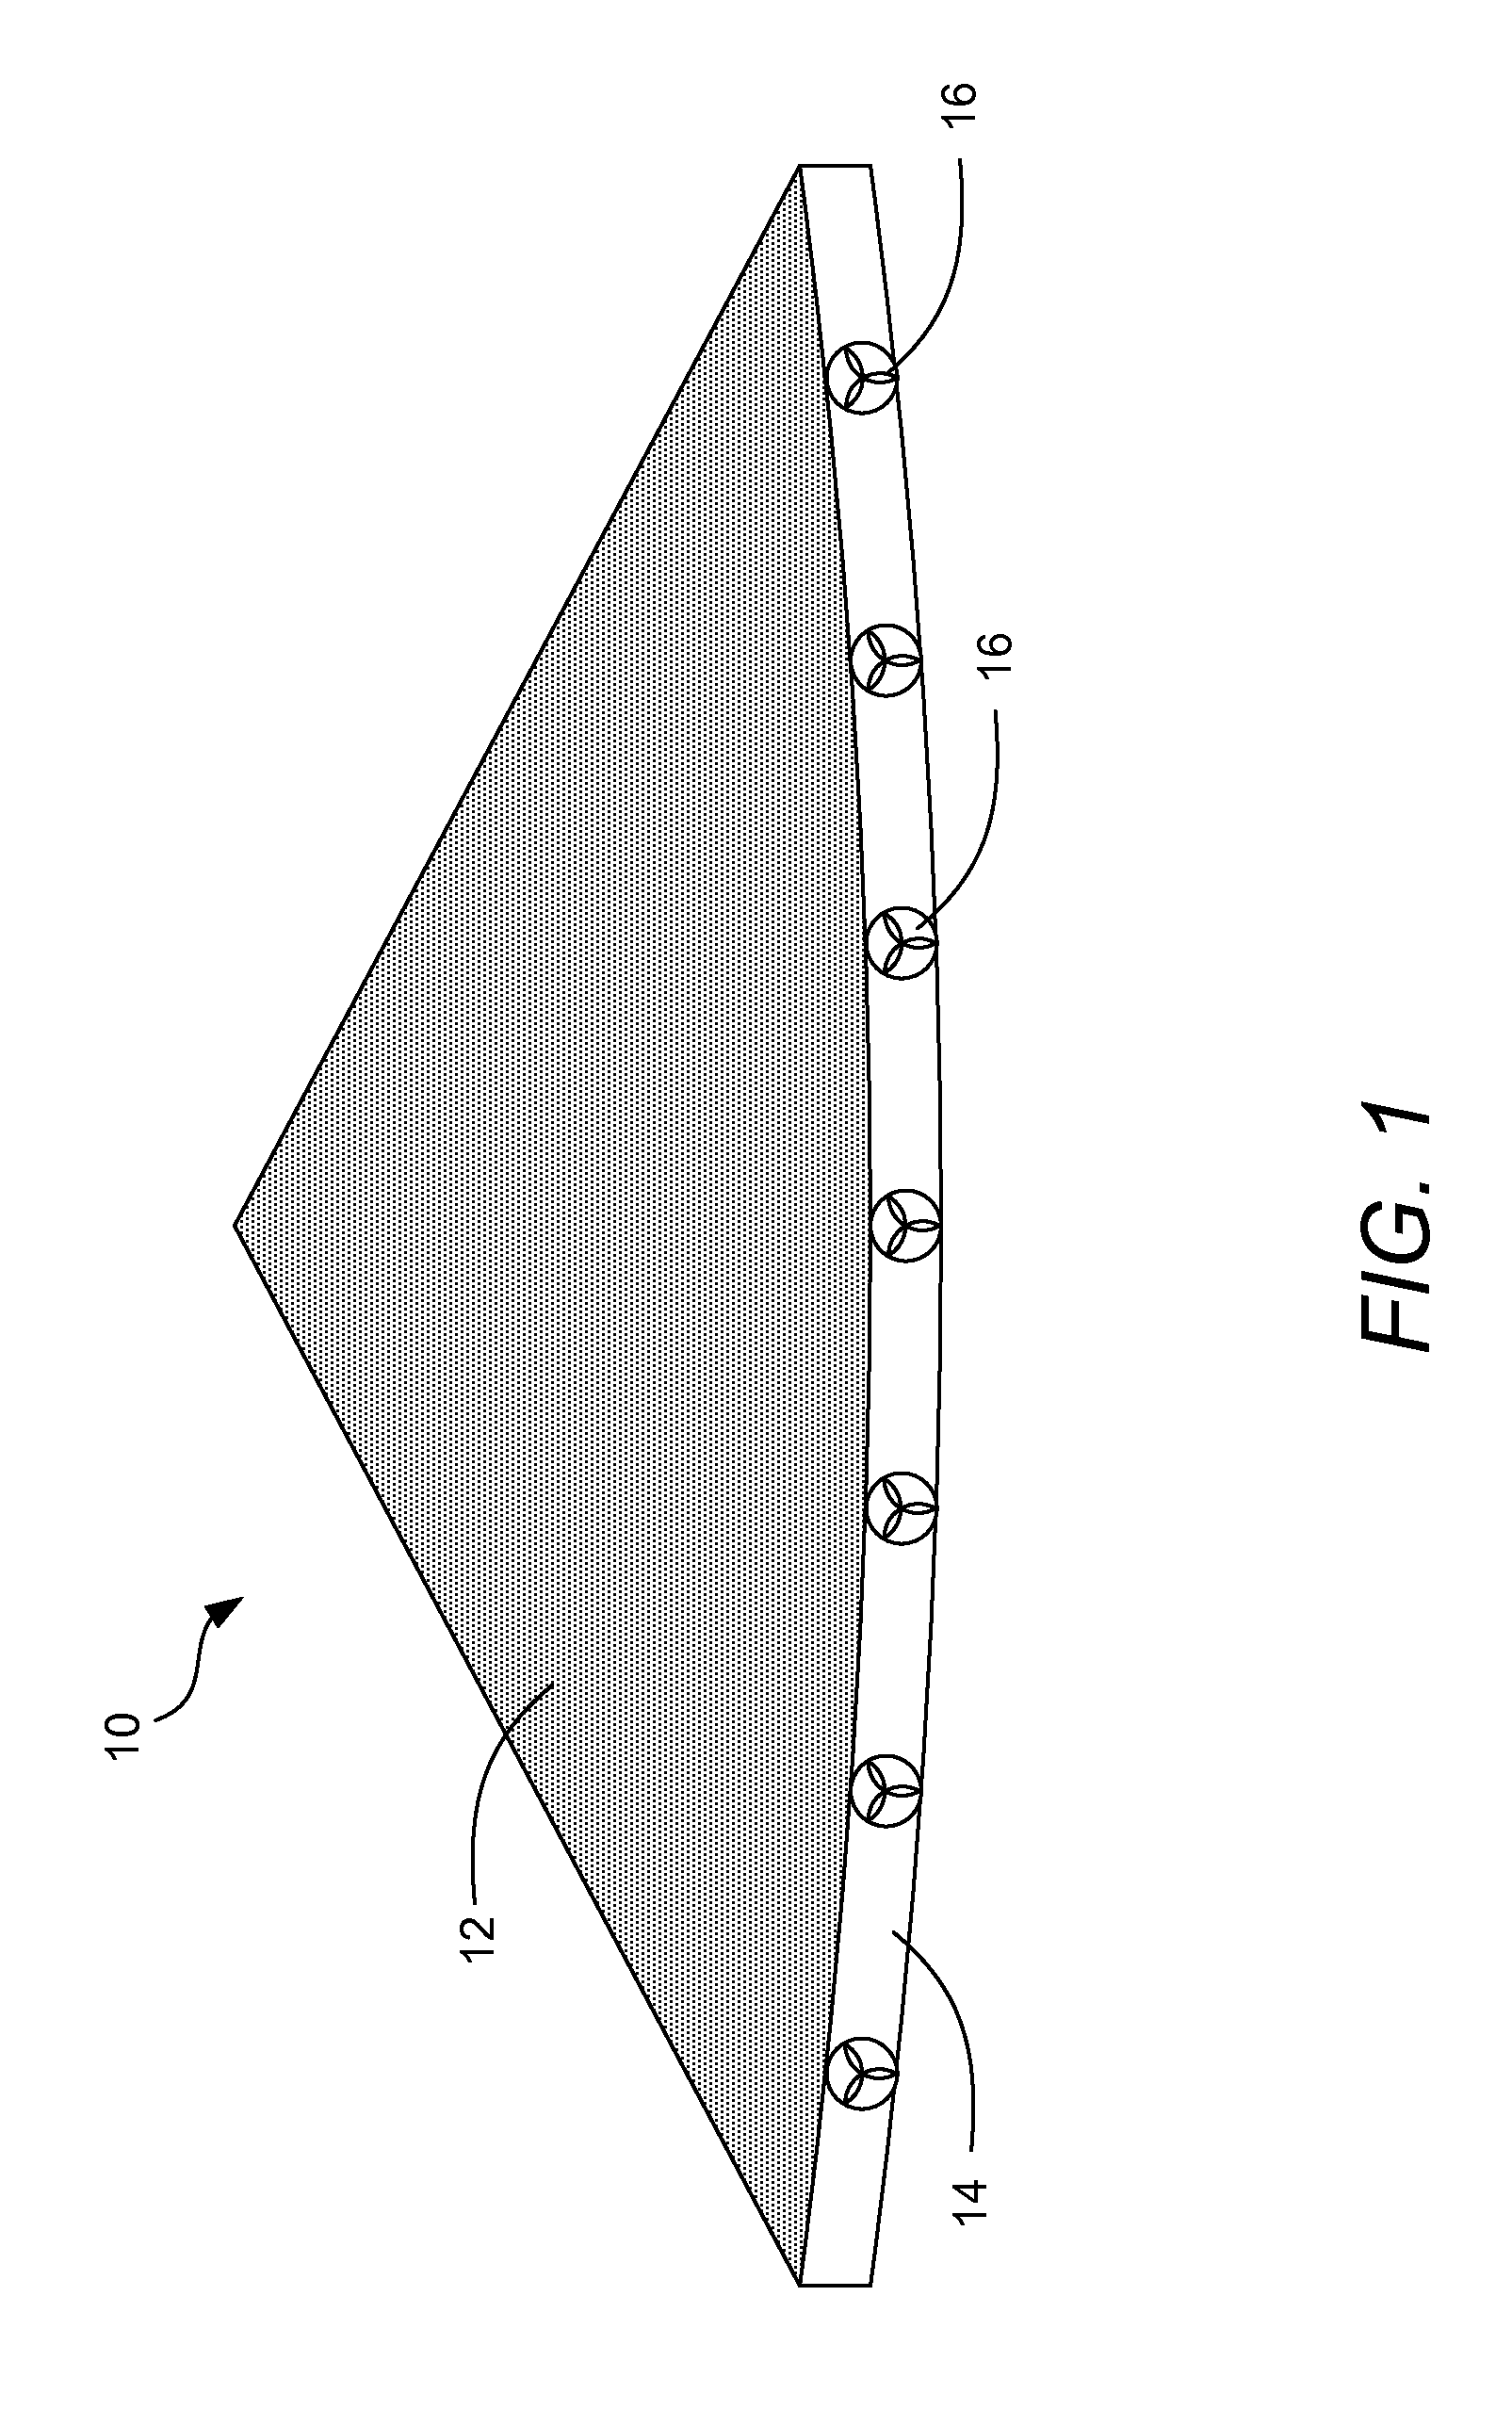 Systems and Methods for Ozone Treatment of Grain in Grain Piles